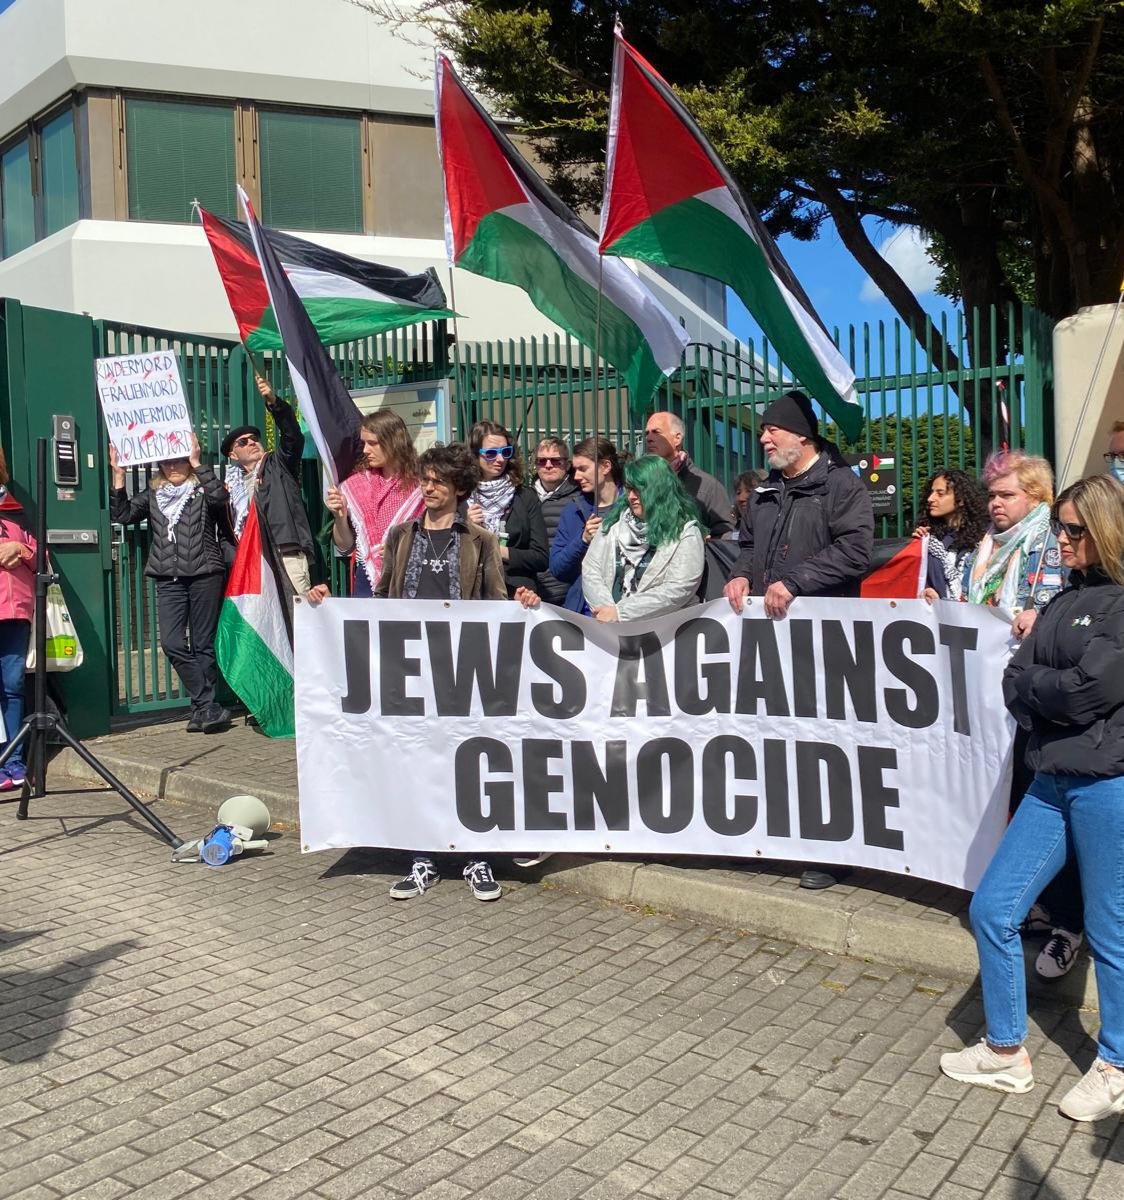 From the protest today against the suppression of the speech and organisation of Palestinian leaders and their supporters including many Jews taking place in Germany